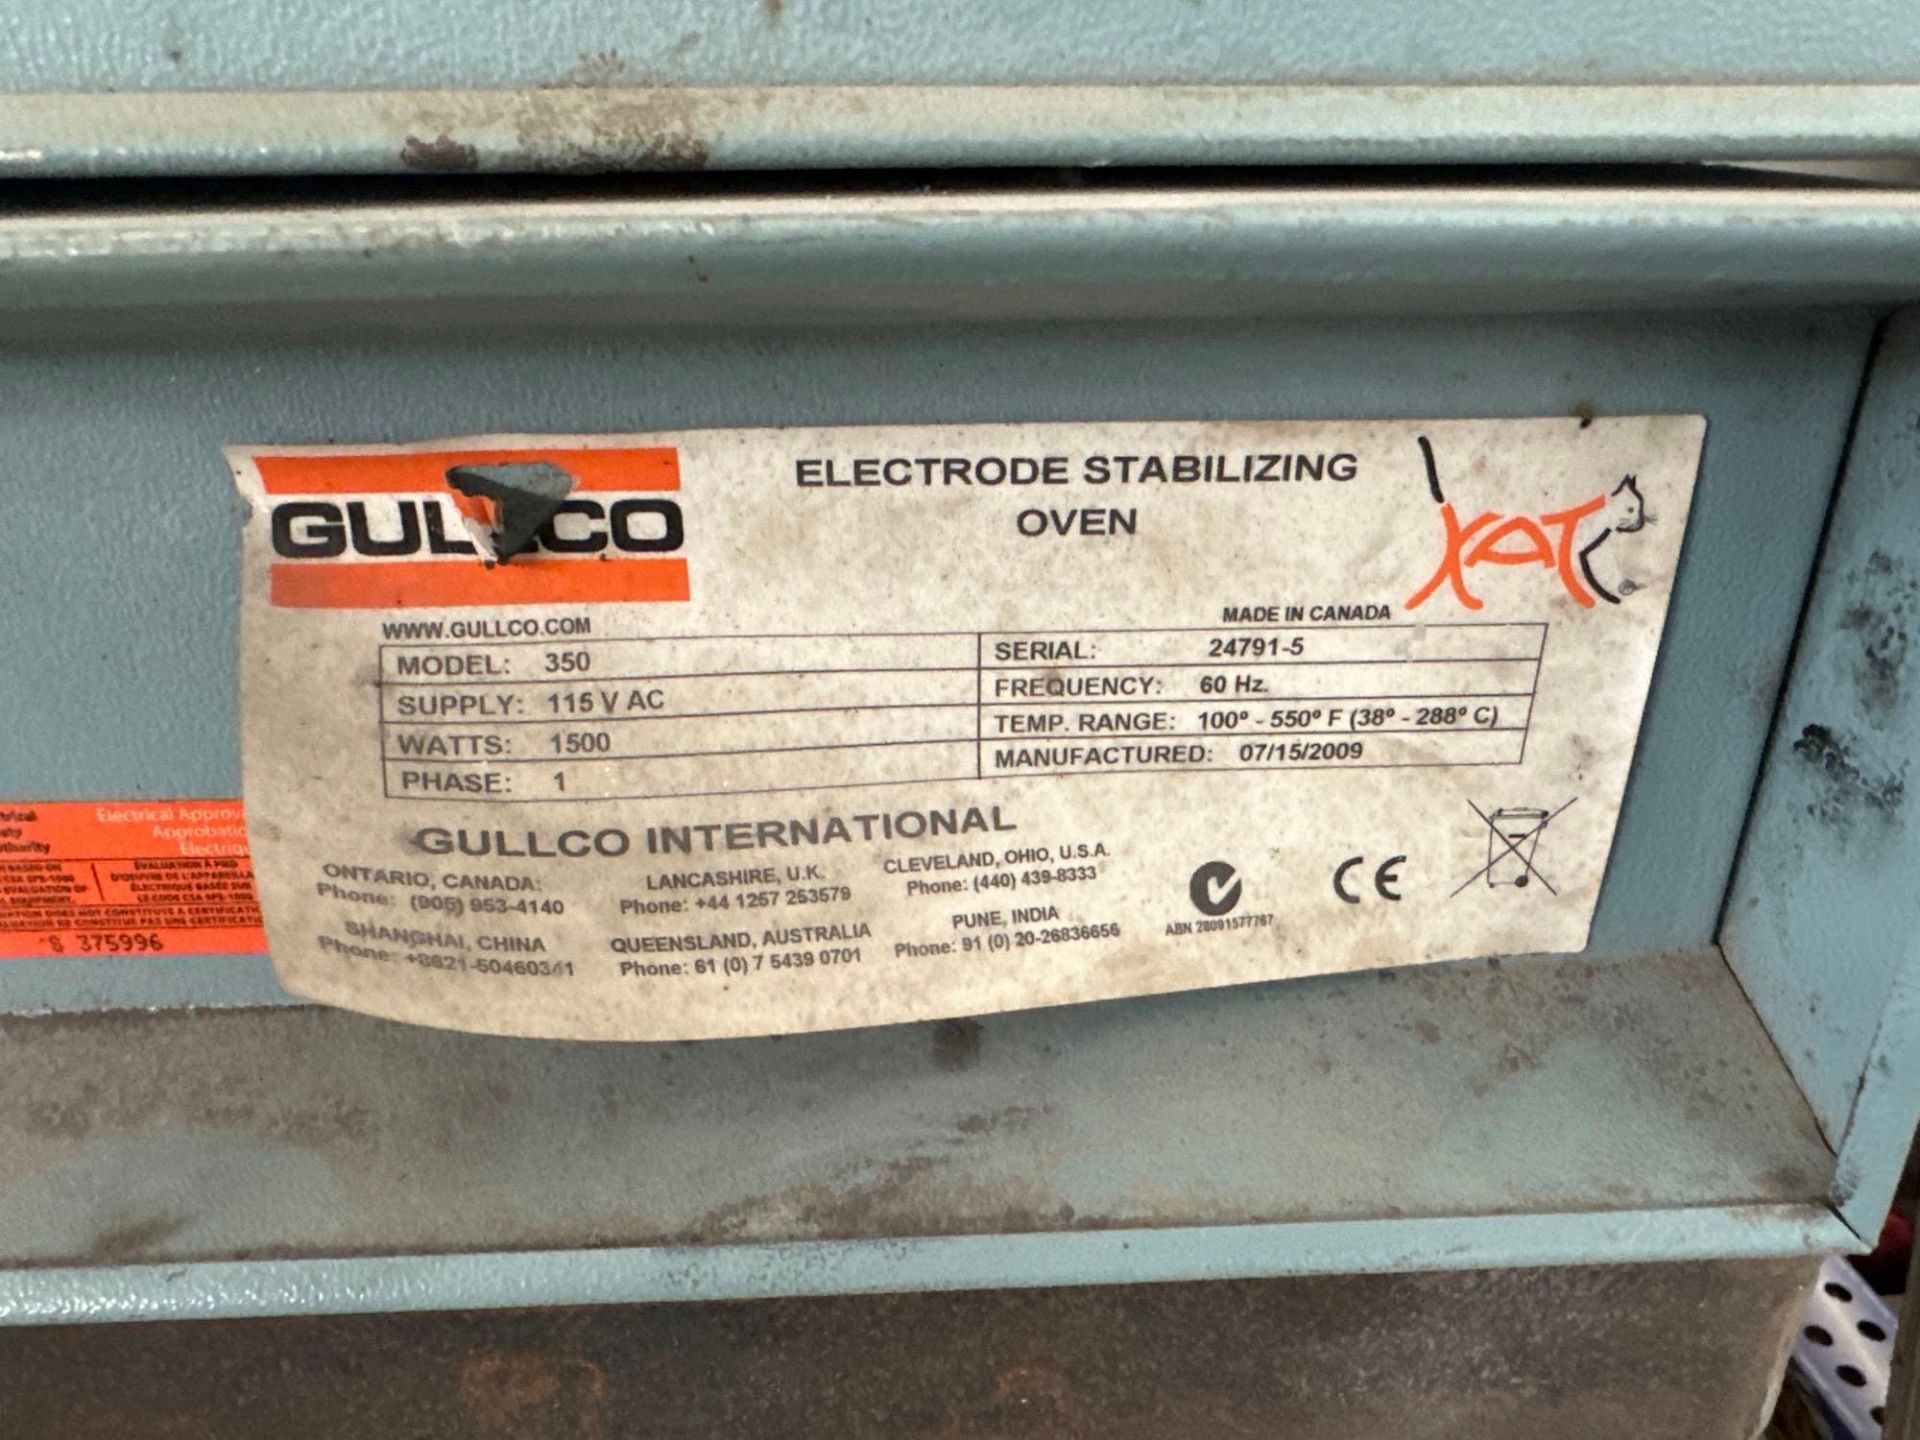 Lot of Gullco 350 Rod Oven w/ Steel Stand, Oxy/ Acetylene Hoses, etc. - Image 4 of 4